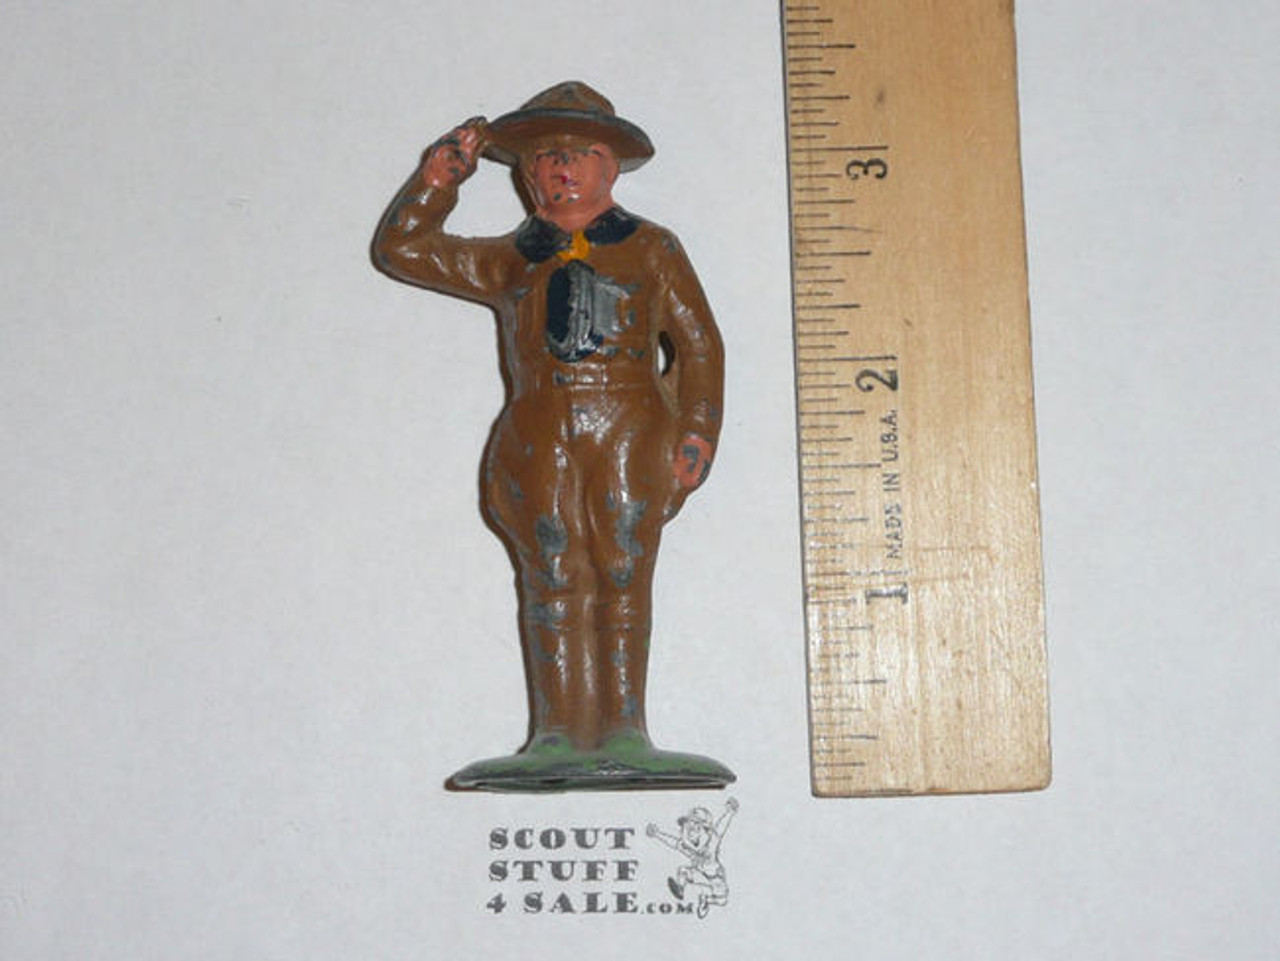 1920's Vintage Barclay B-183 Boy Scout Saluting #802 Lead Toy Soldier #2, used